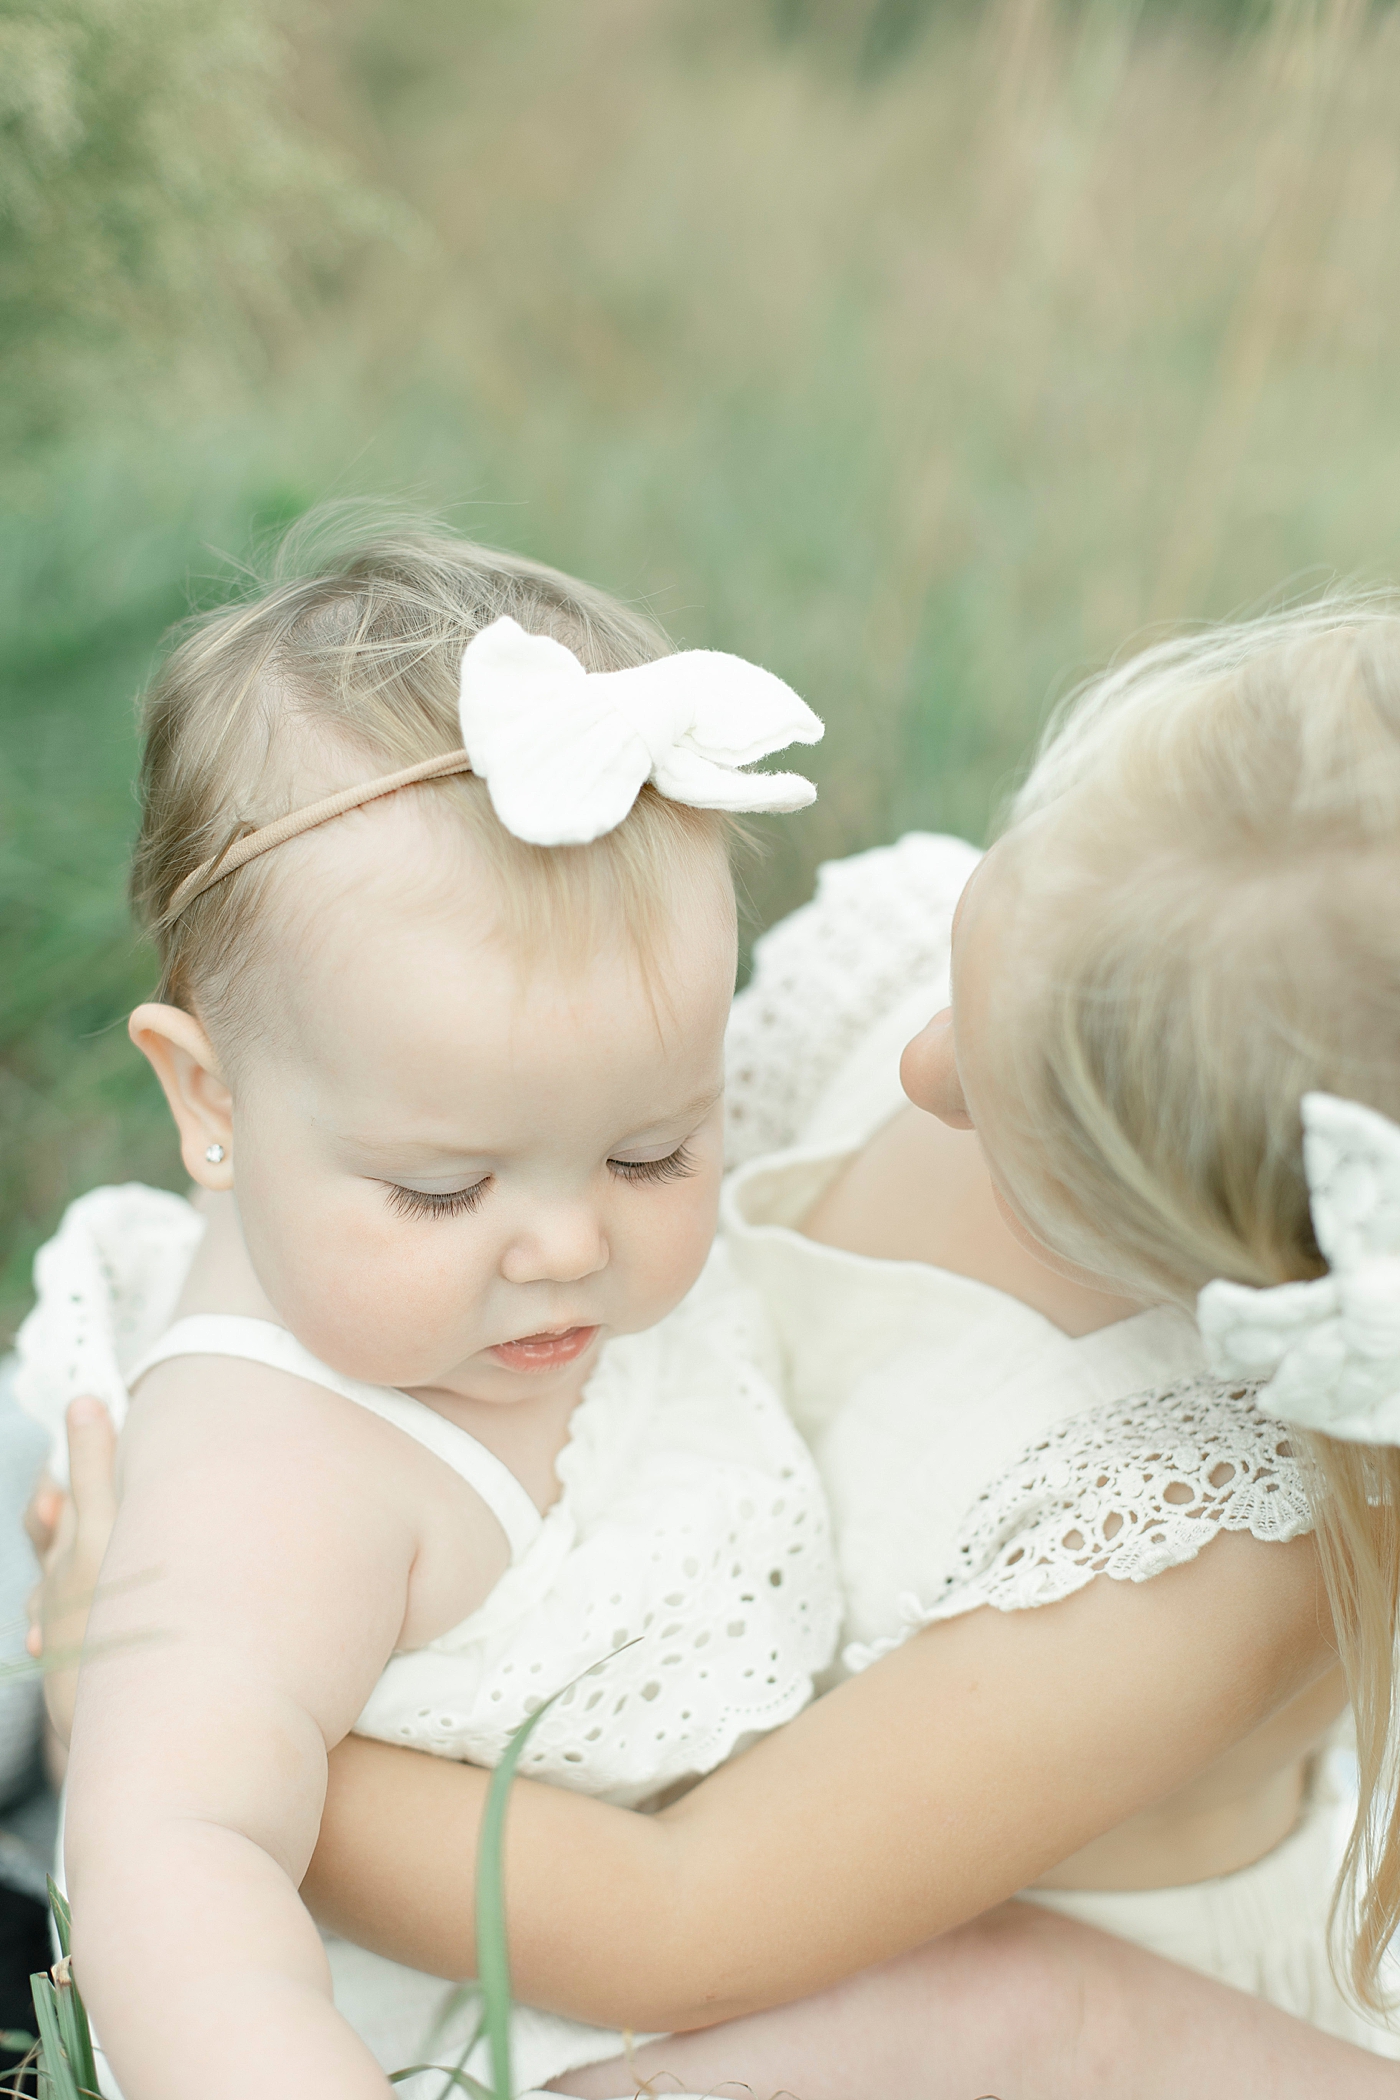 Sisters in white snuggling together in a field | Photo by Little Sunshine Photography 